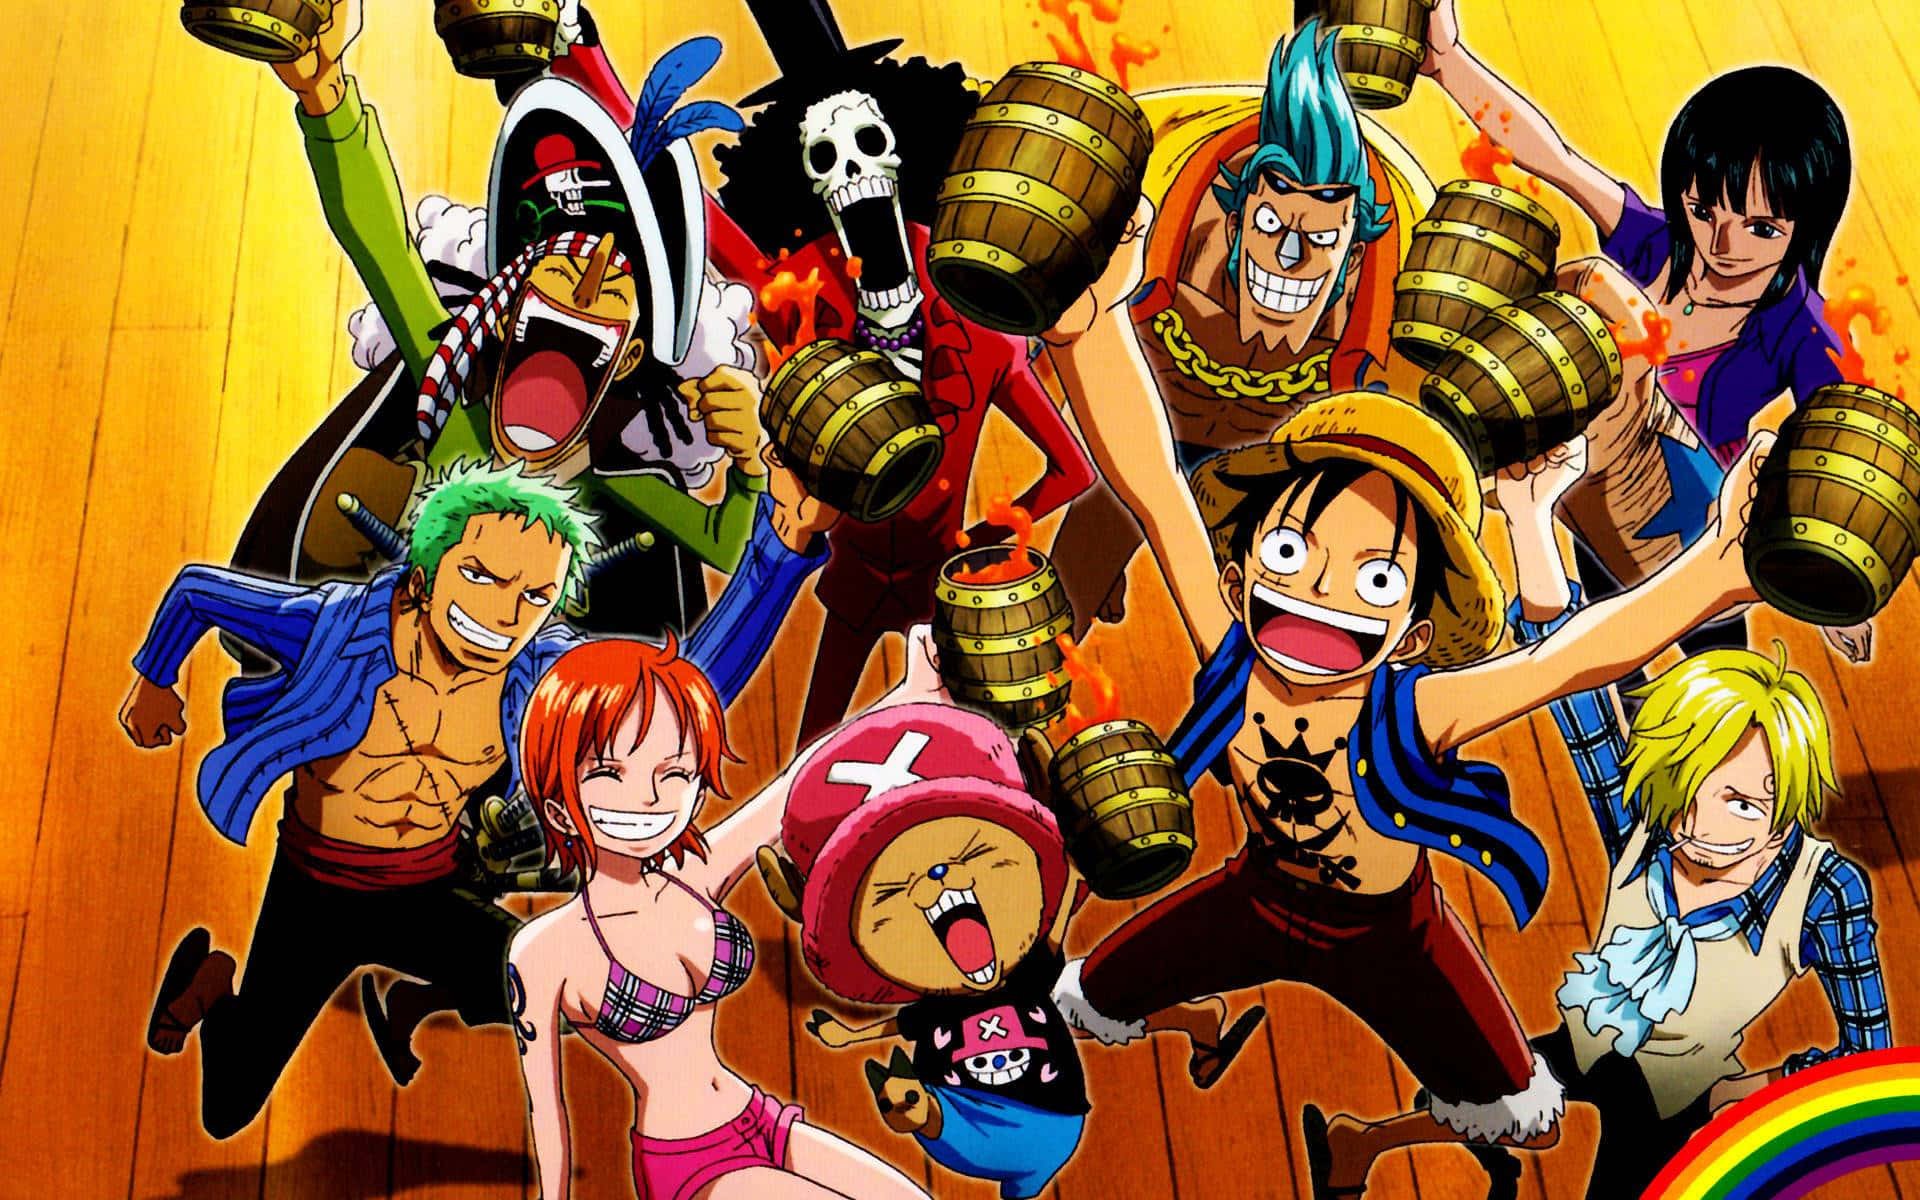 The Powerful One Piece Characters in Action Wallpaper